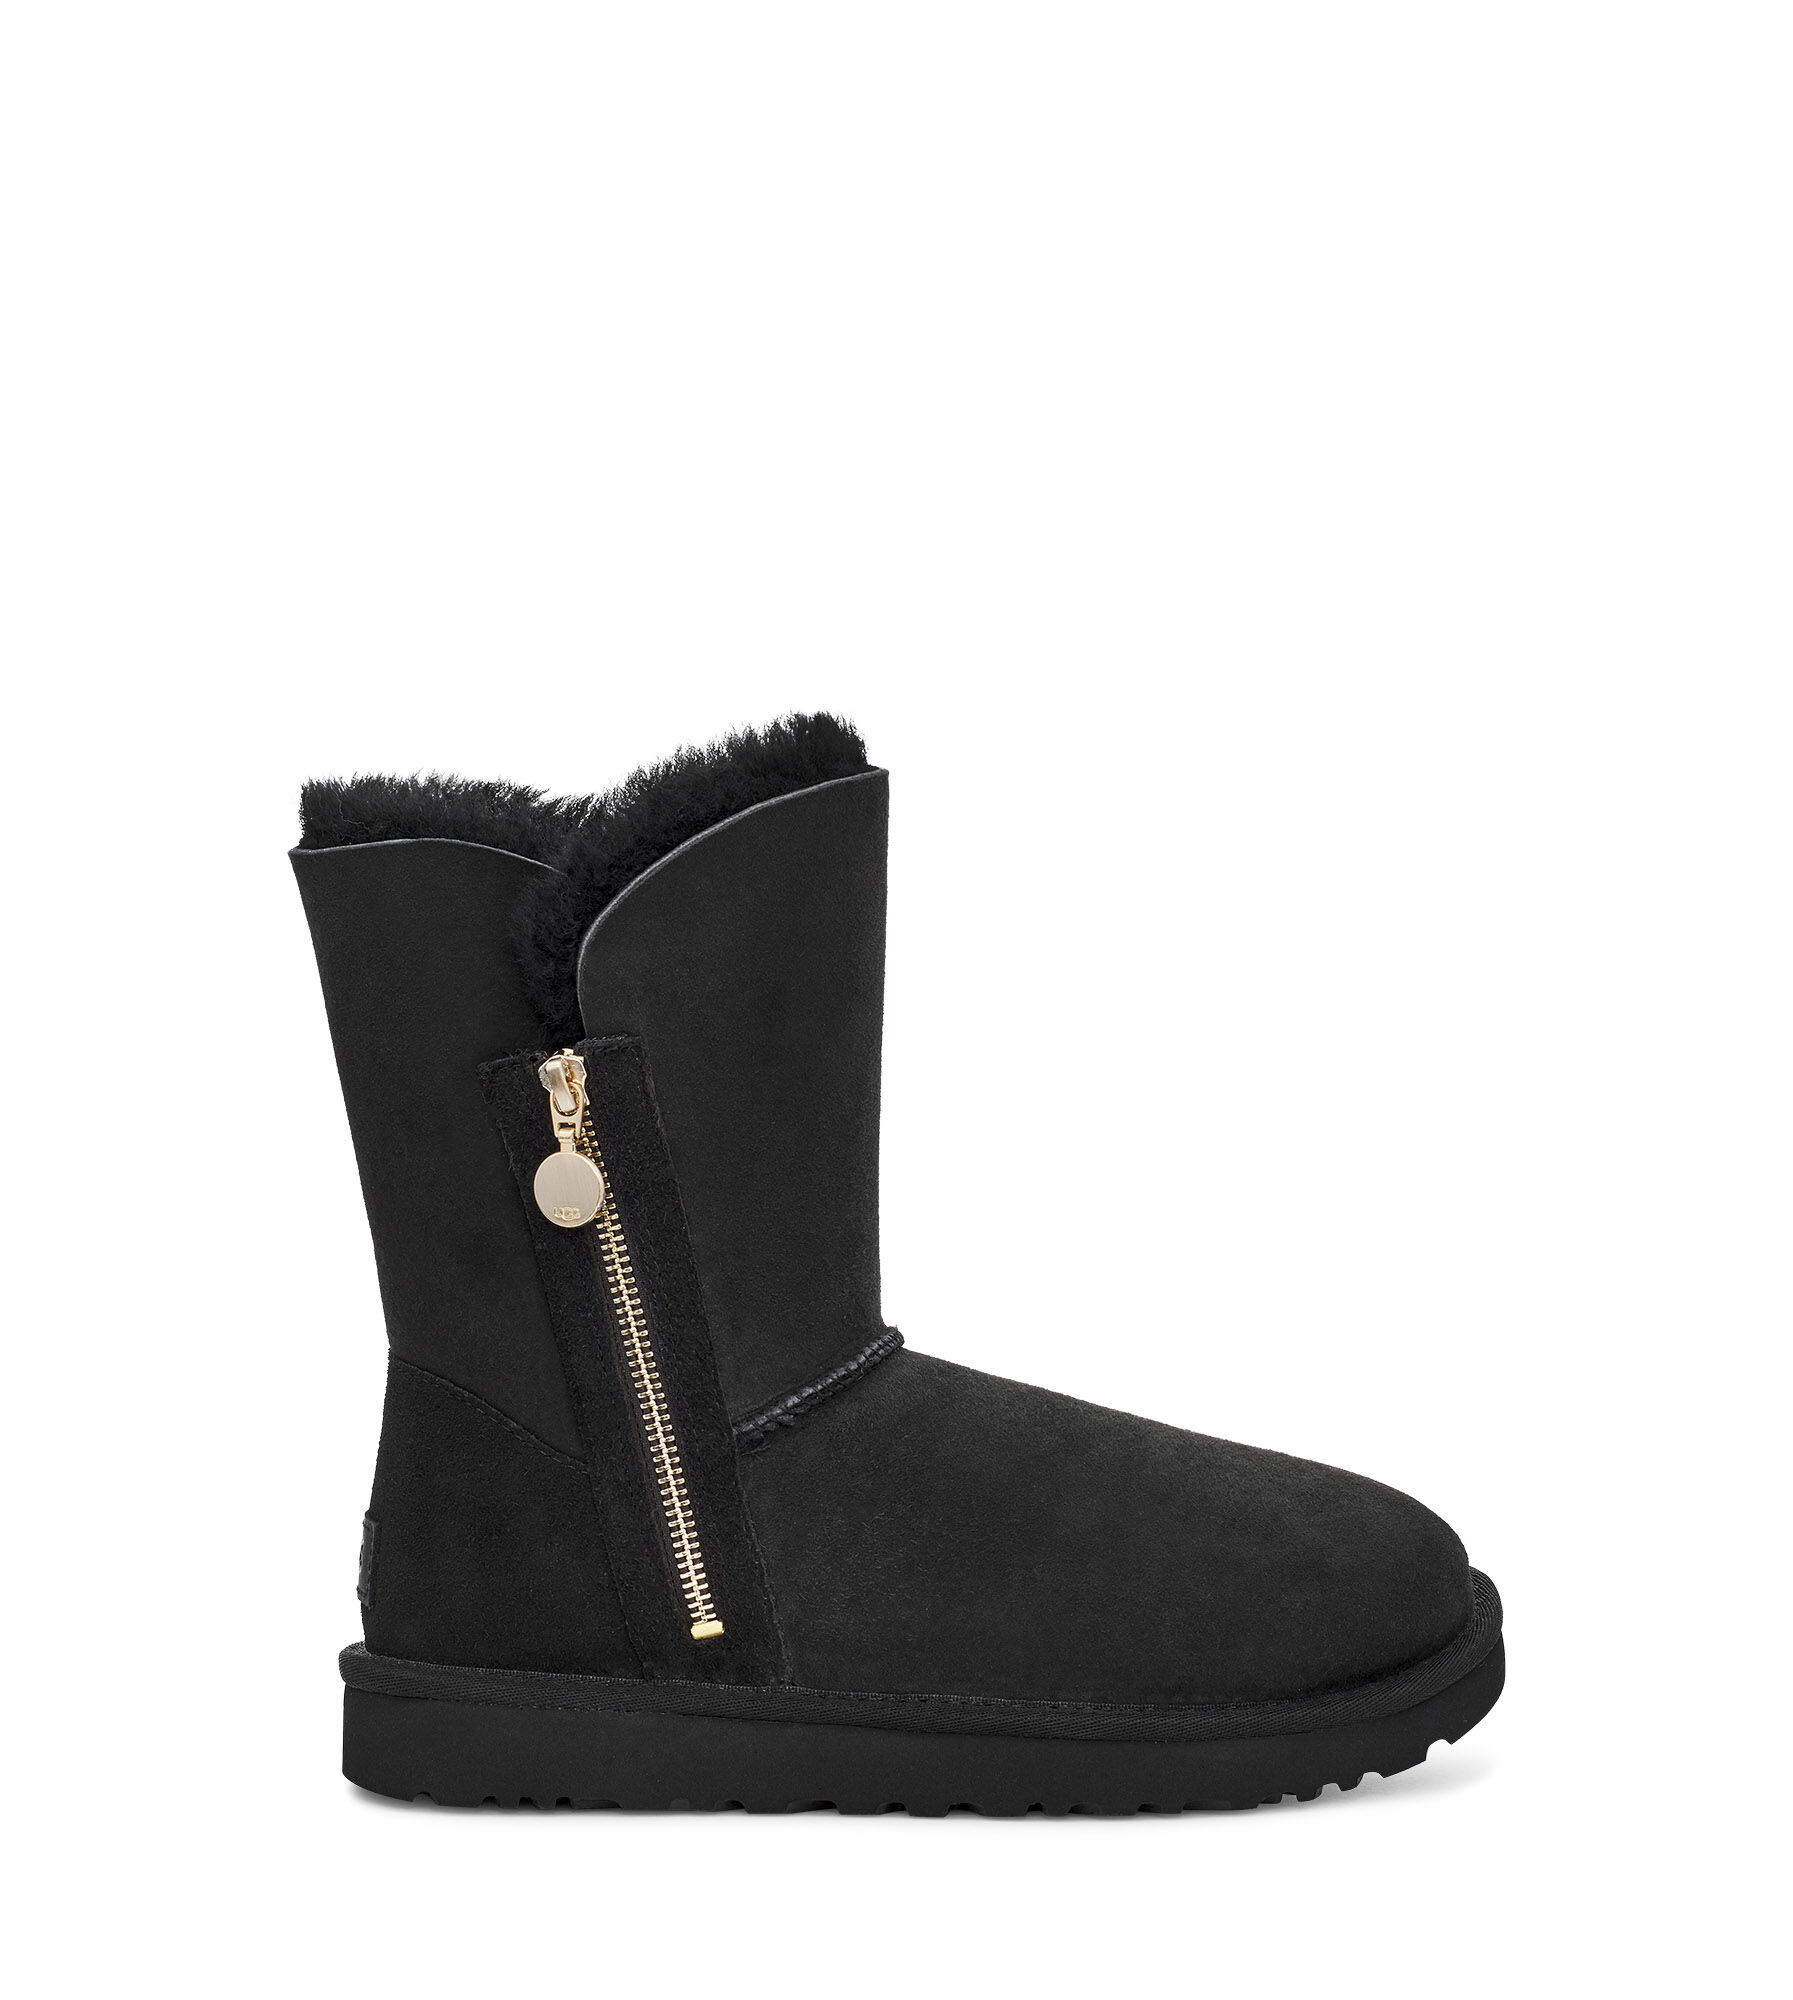 ugg boots with zipper on side 